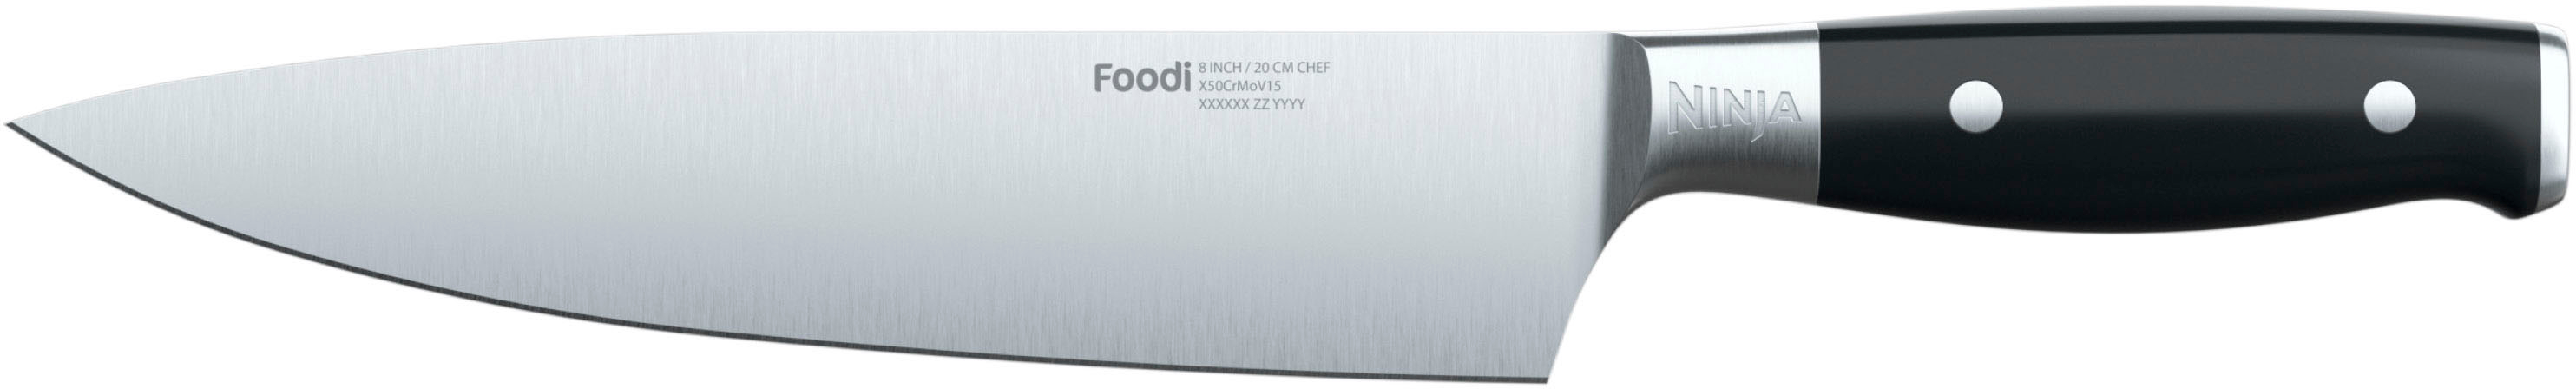 Restaurantware Sensei Back of the House with HACCP Protection Chef's Knife  10 inches Premium German Steel